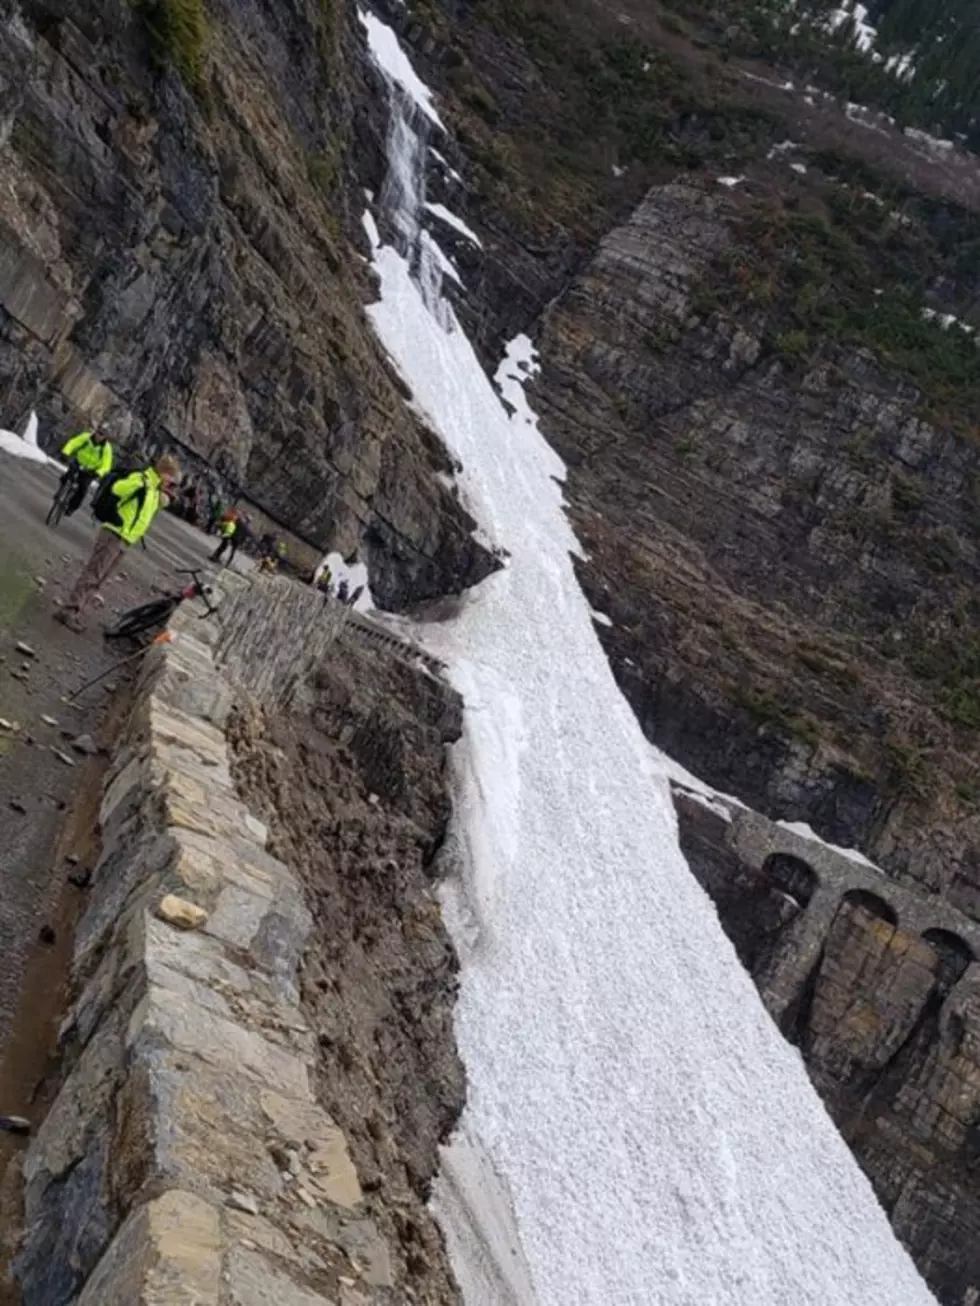 Glacier Park: Avalanche strands 13 bicyclists on Going-to-the-Sun Road